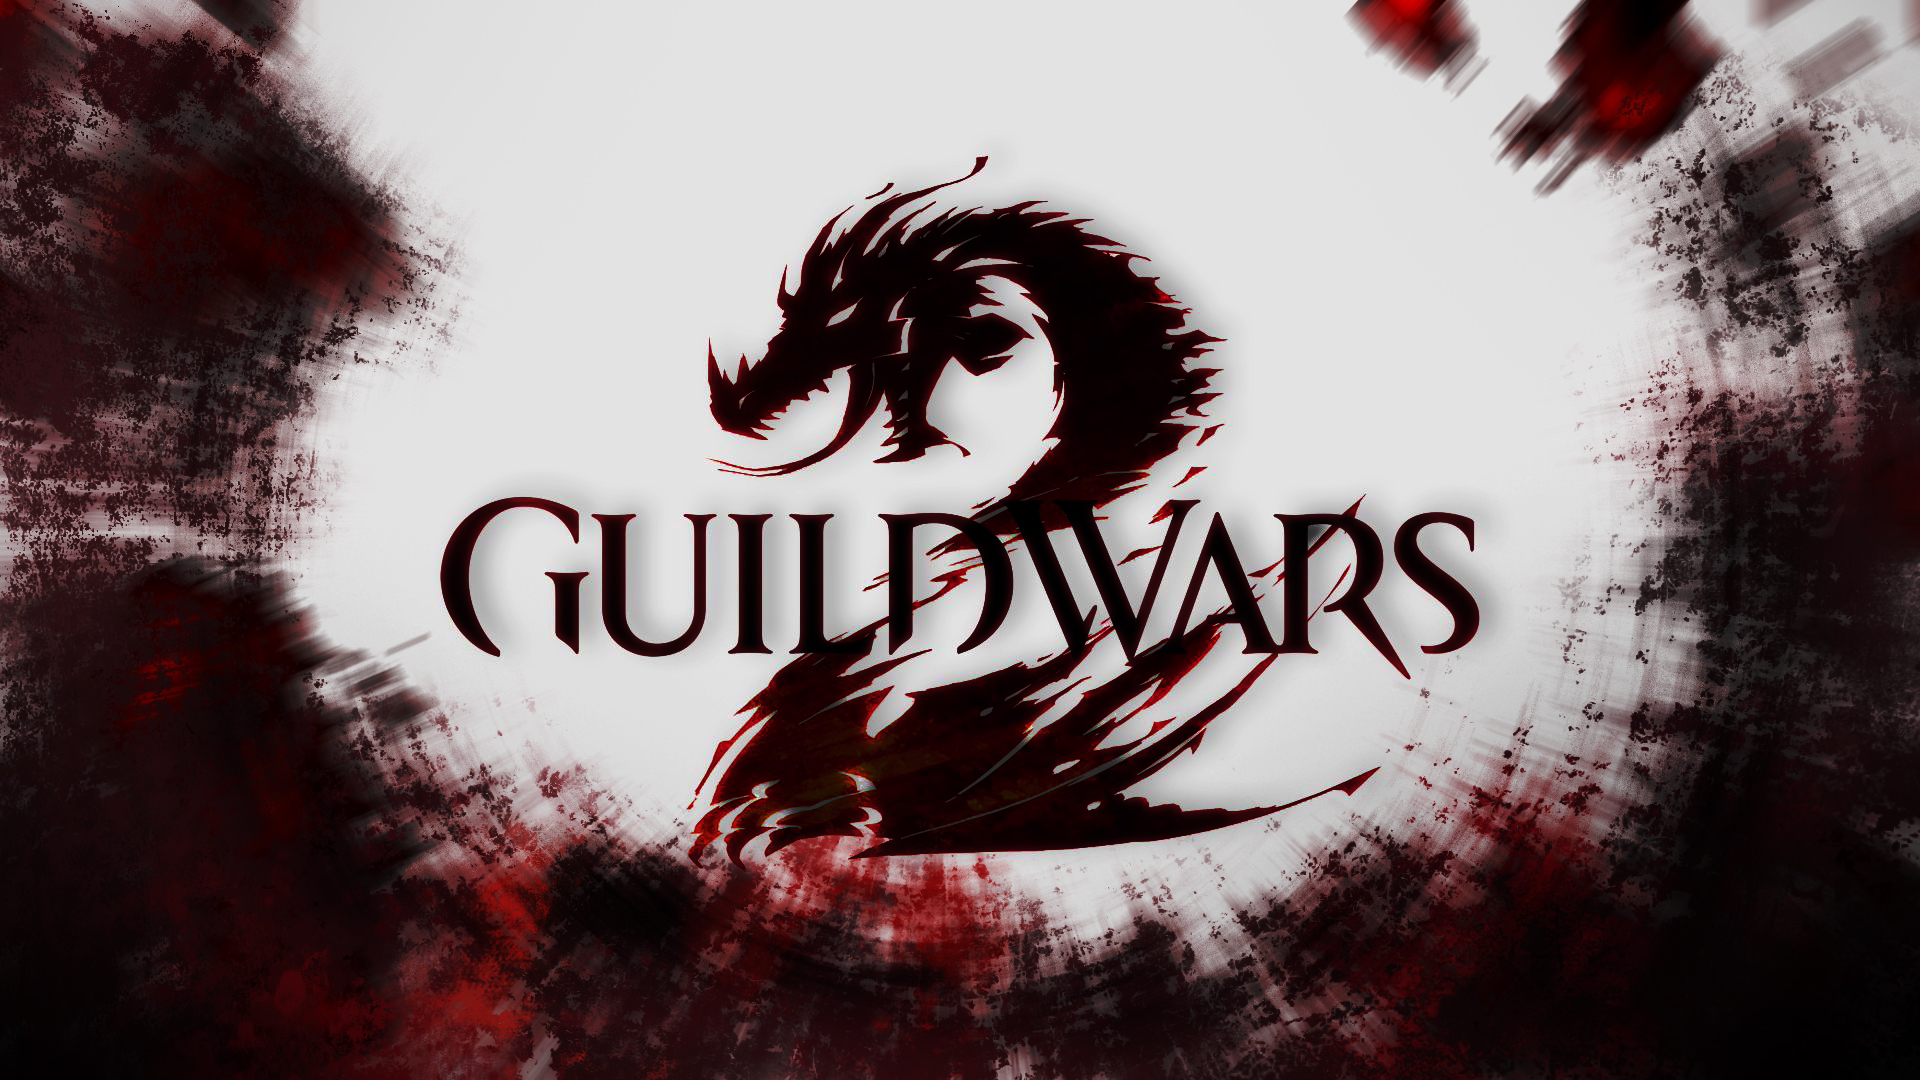 Free Fire Guild Logos Wallpapers - Wallpaper Cave